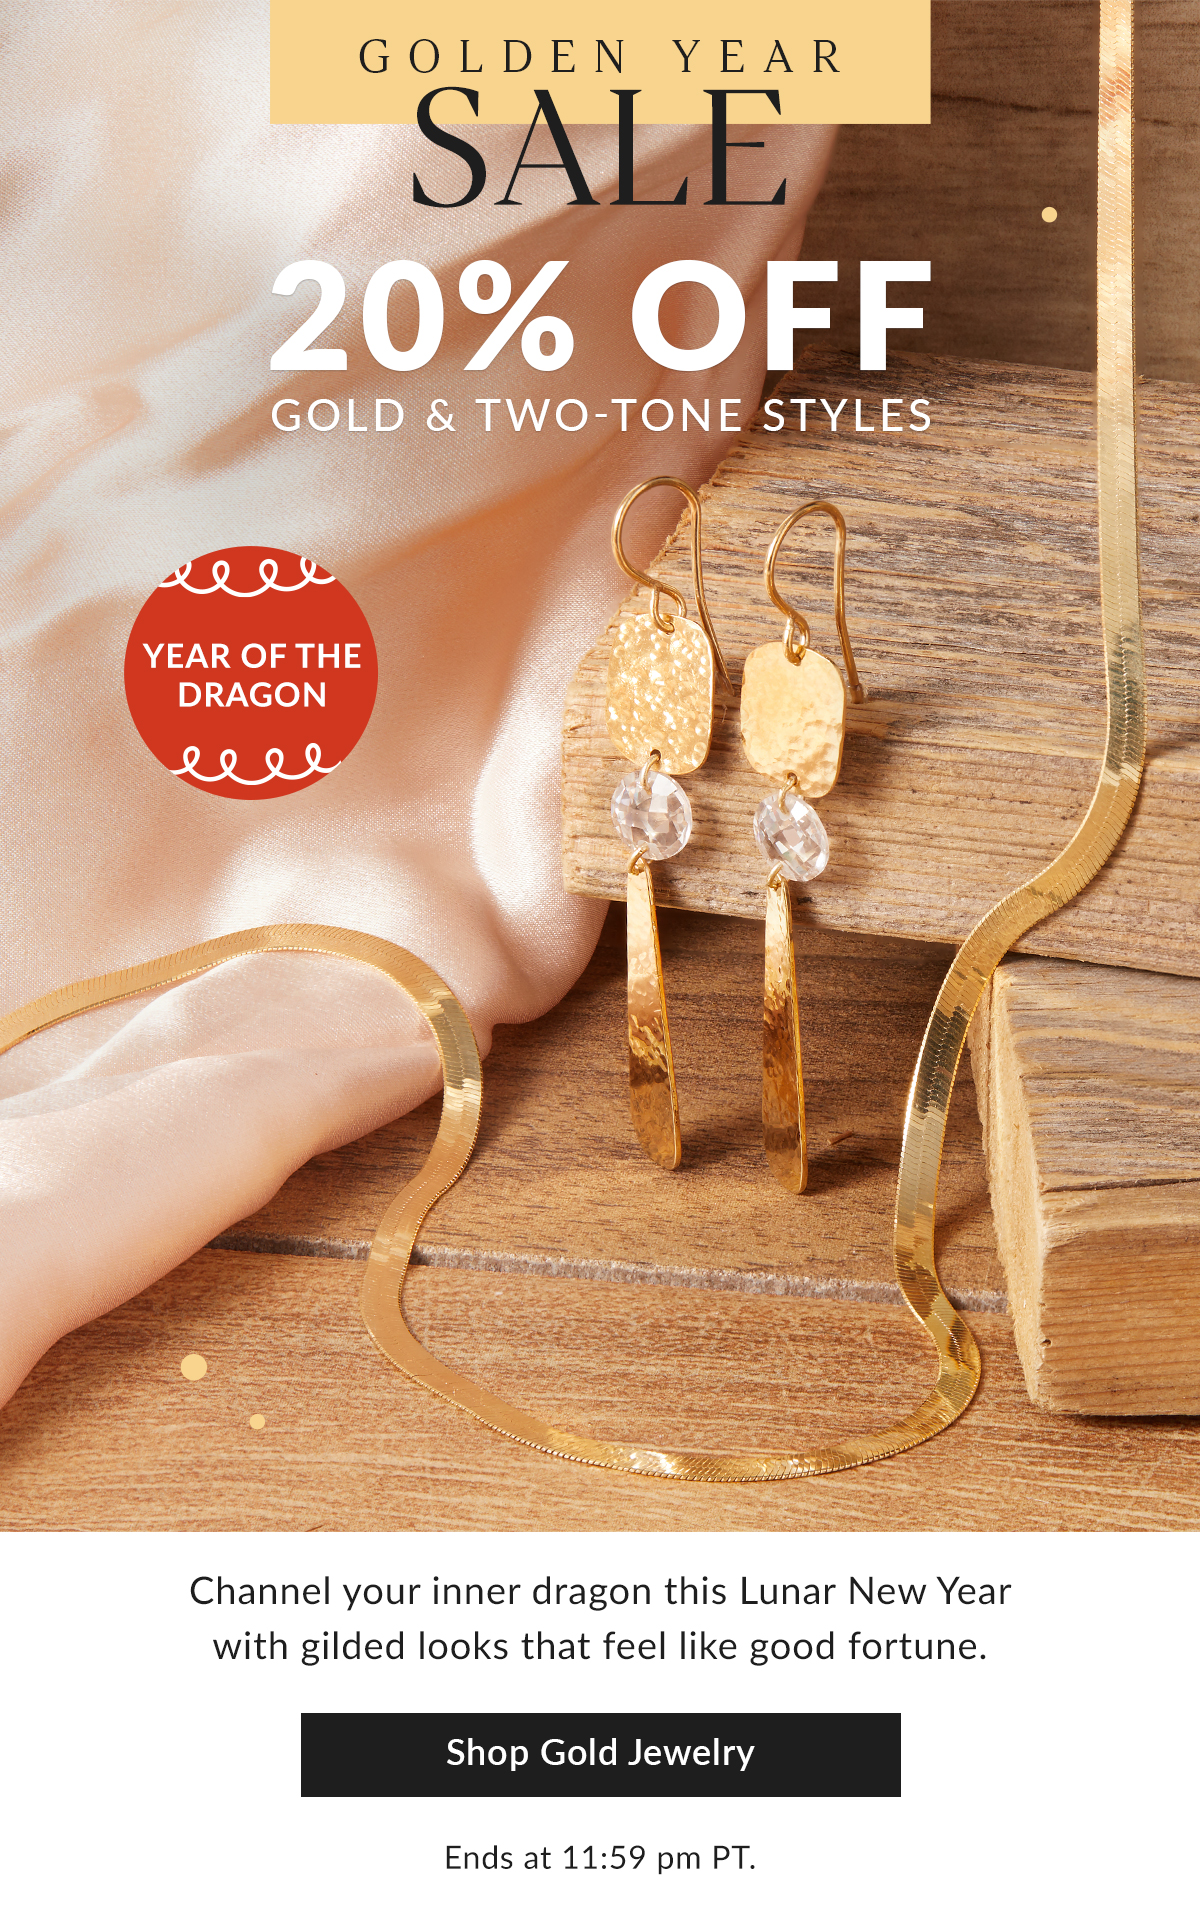 20% off Gold & Two-Tone Styles